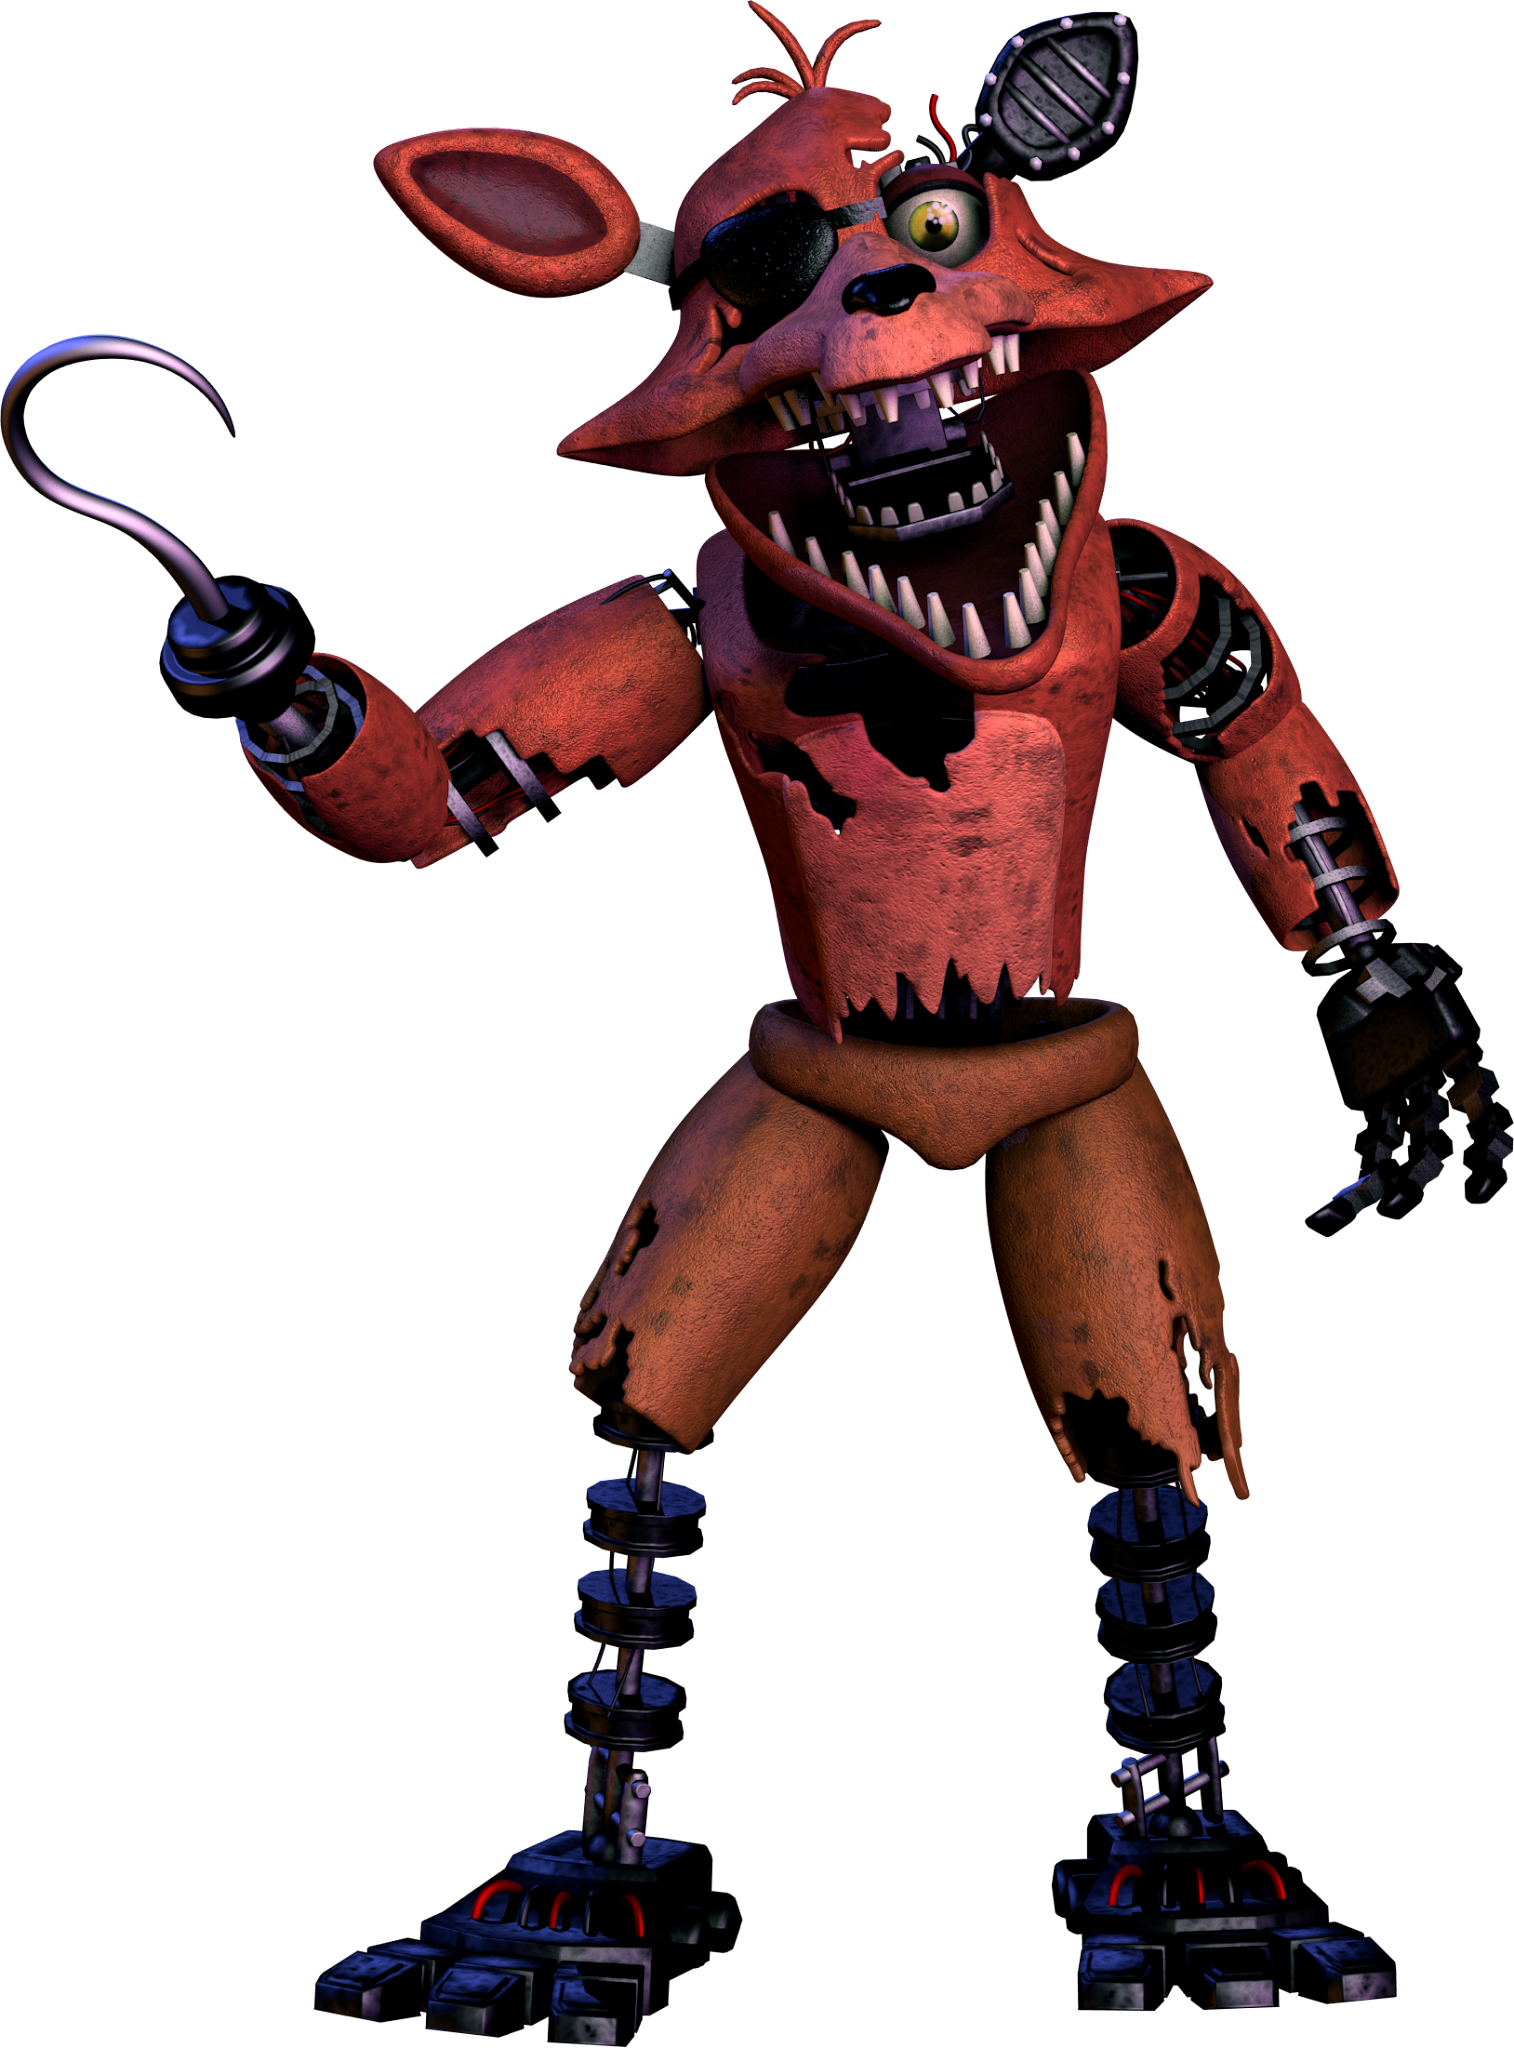 Five Nights at Freddy's Фокси. Олд Фокси. Withered Foxy. АНИМАТРОНИК Олд Фокси. Фокси без